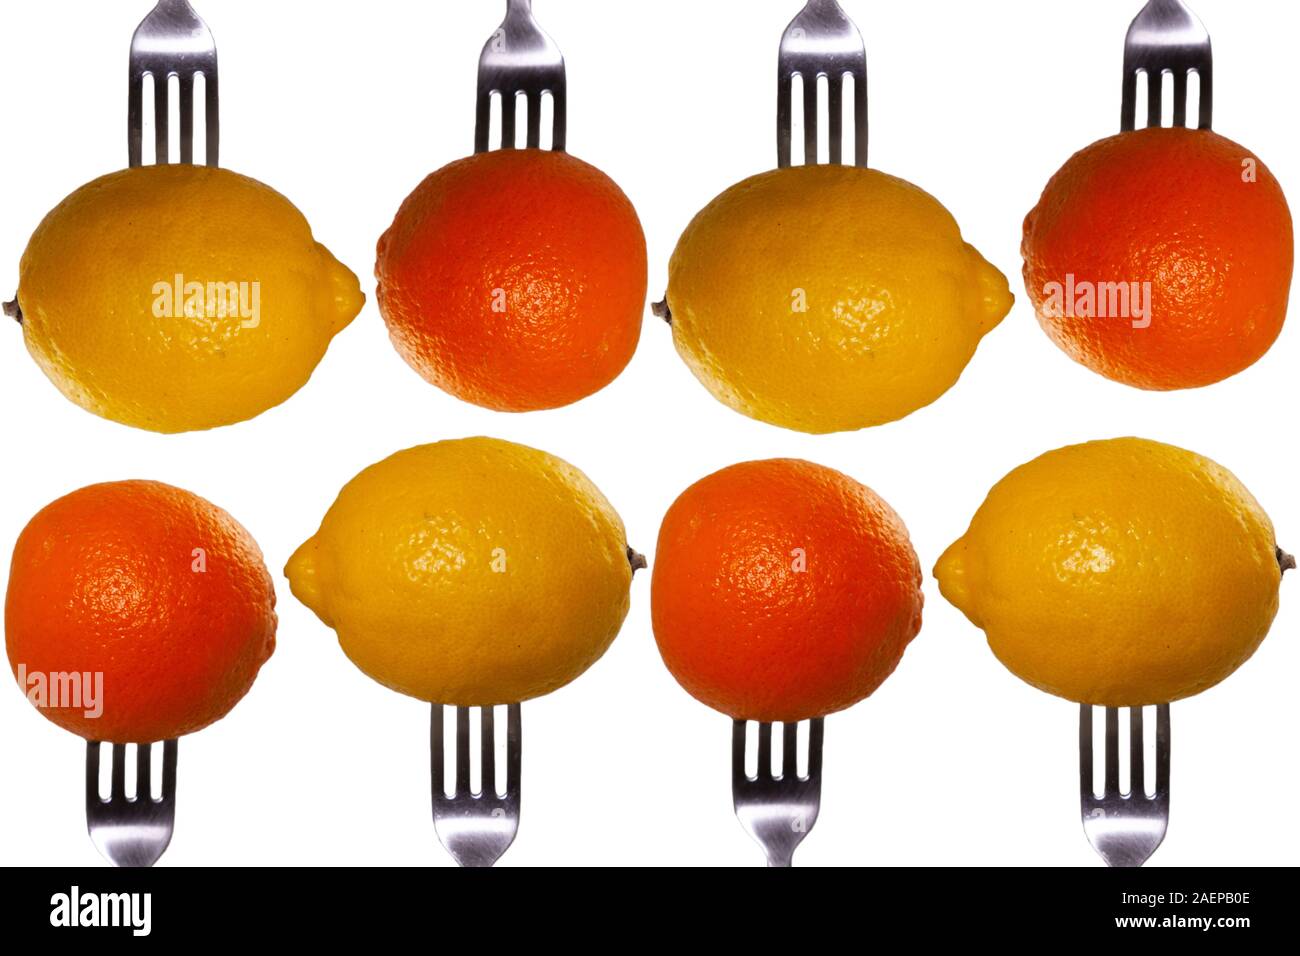 Oranges and Lemons on forks.  Eat up and get all your nutrients! Stock Photo